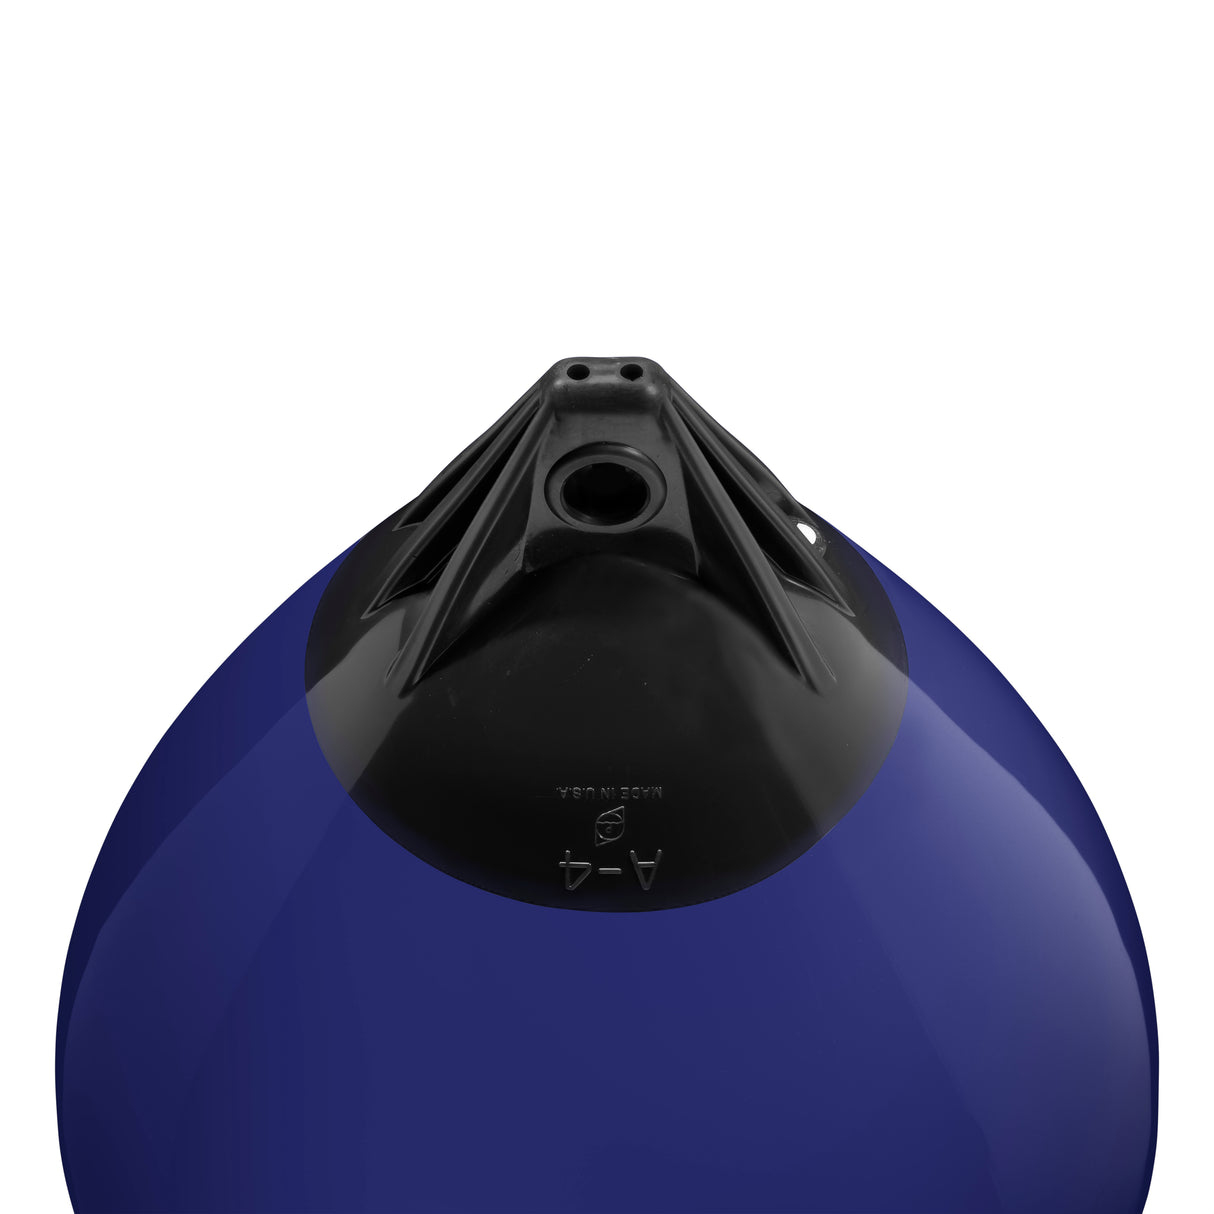 Navy Blue buoy with Black-Top, Polyform A-4 angled shot